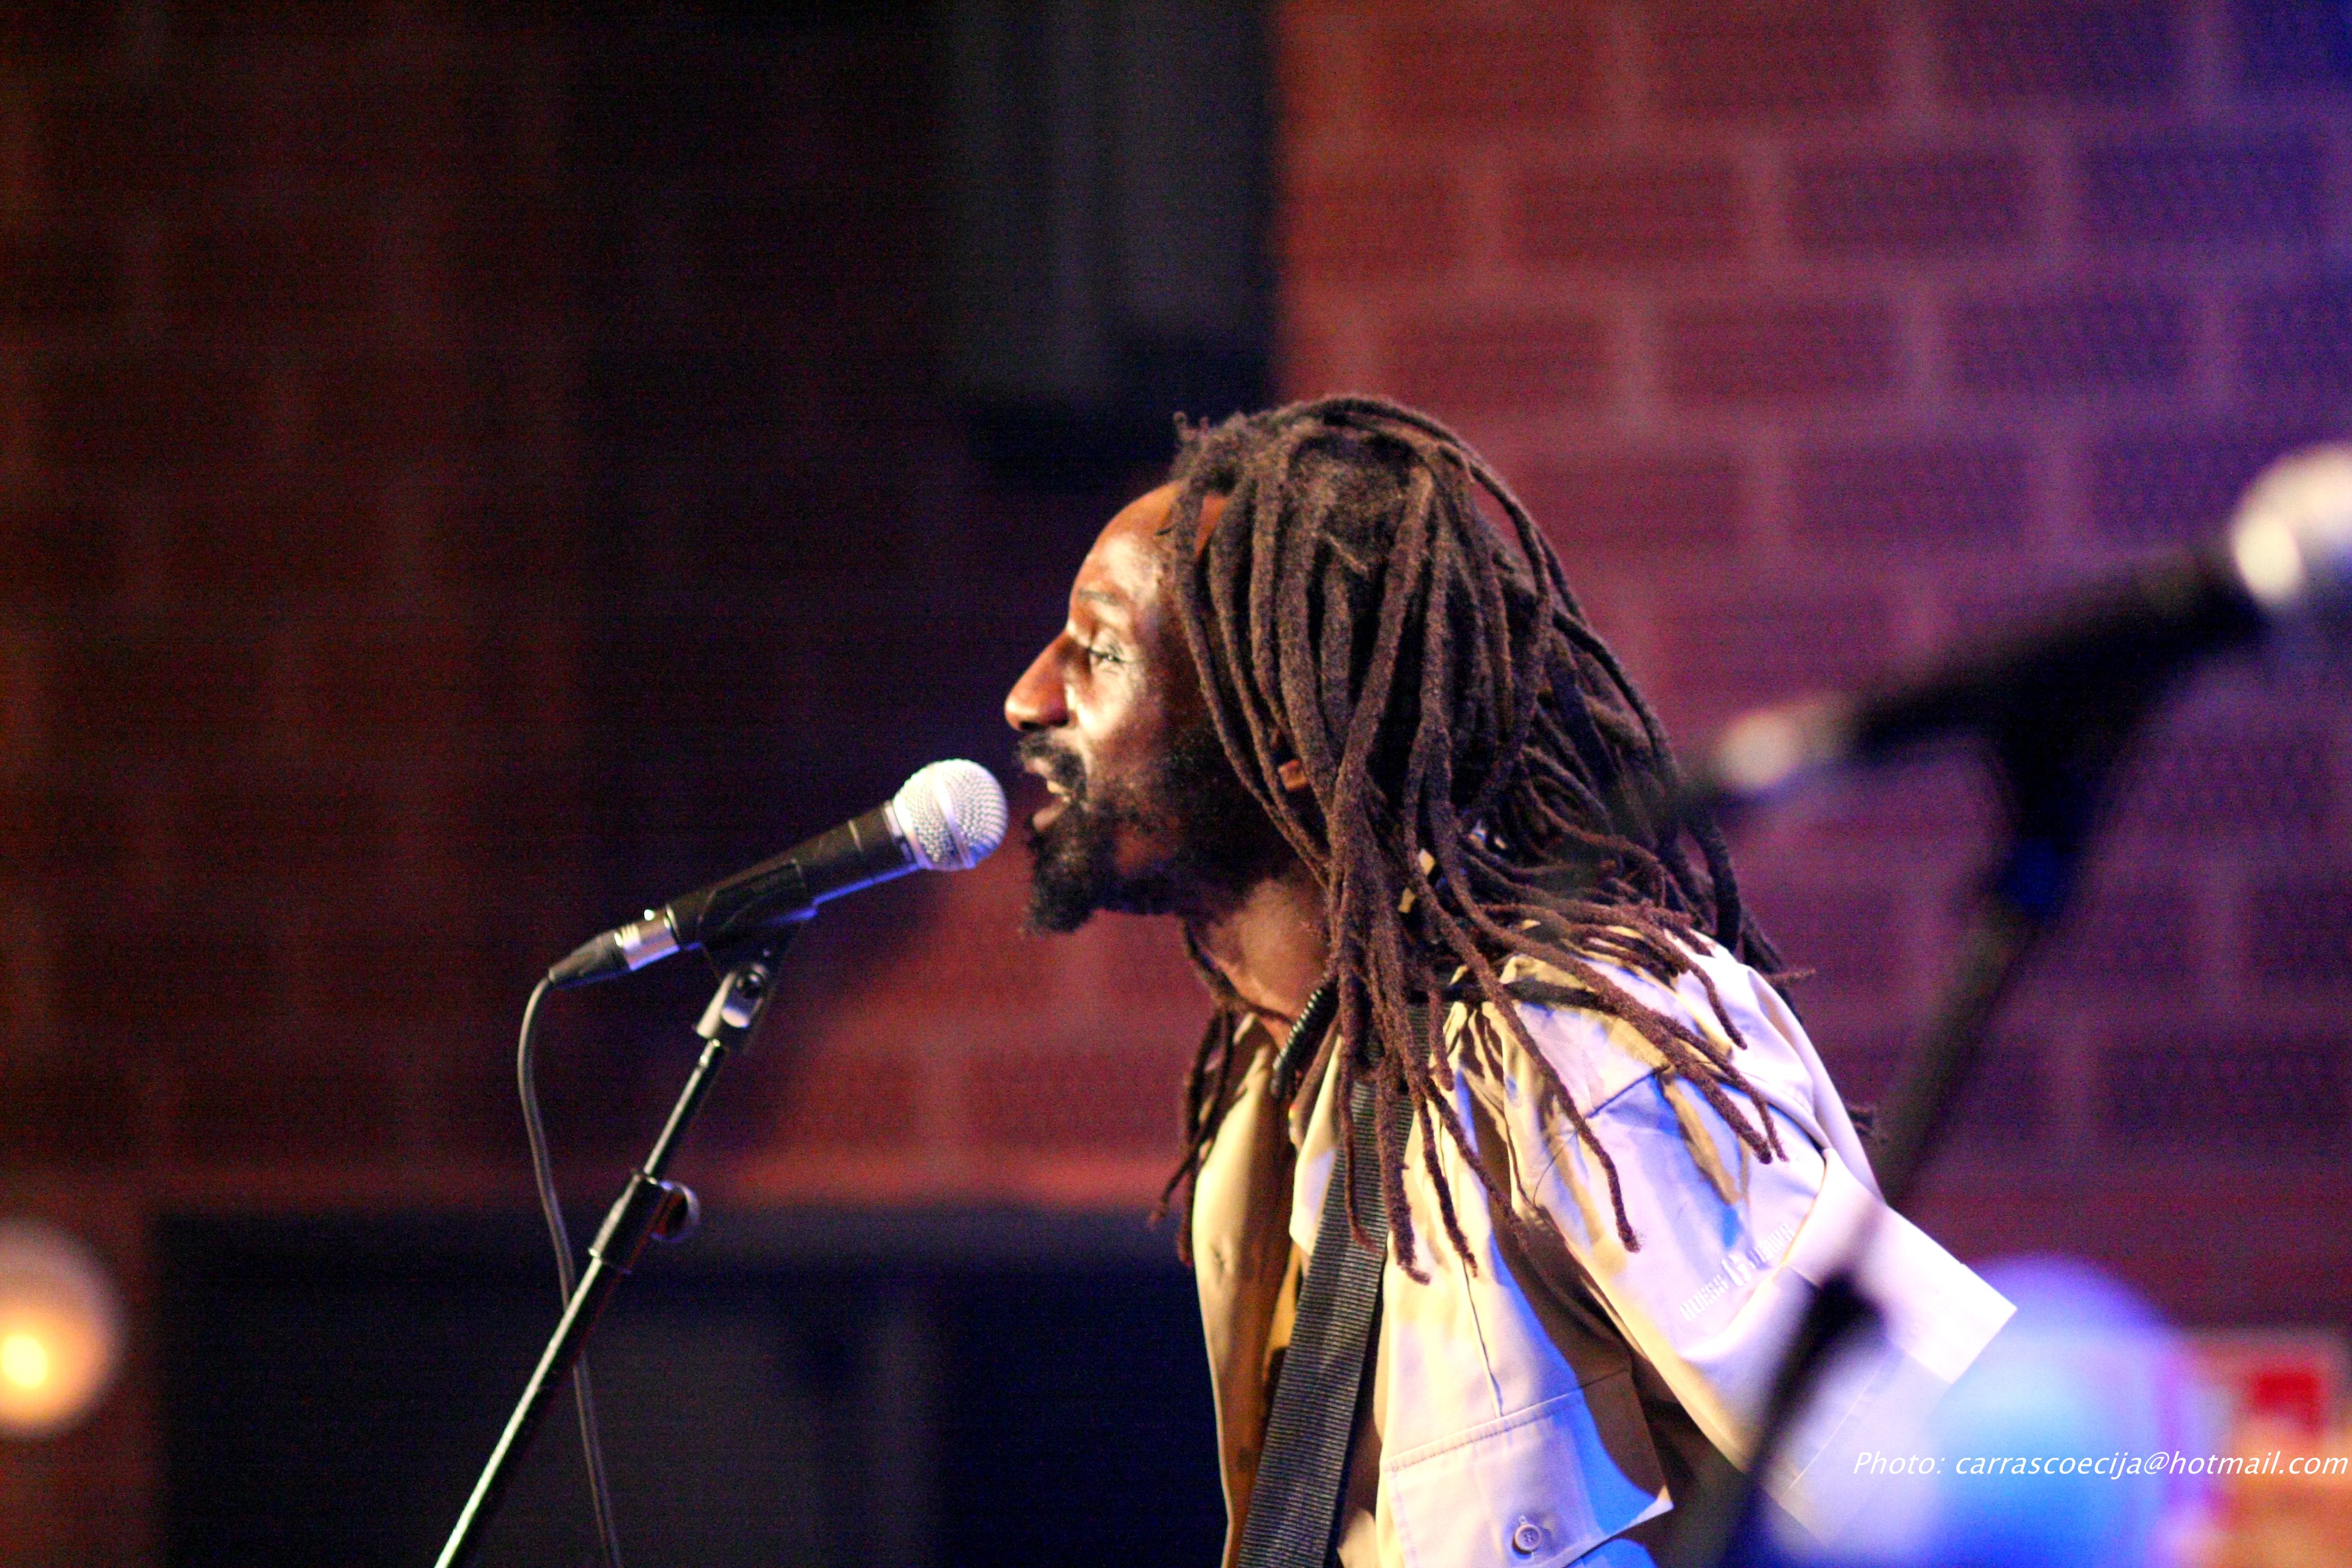 Legend: The Music of Bob Marley at the Victoria Theatre Halifax